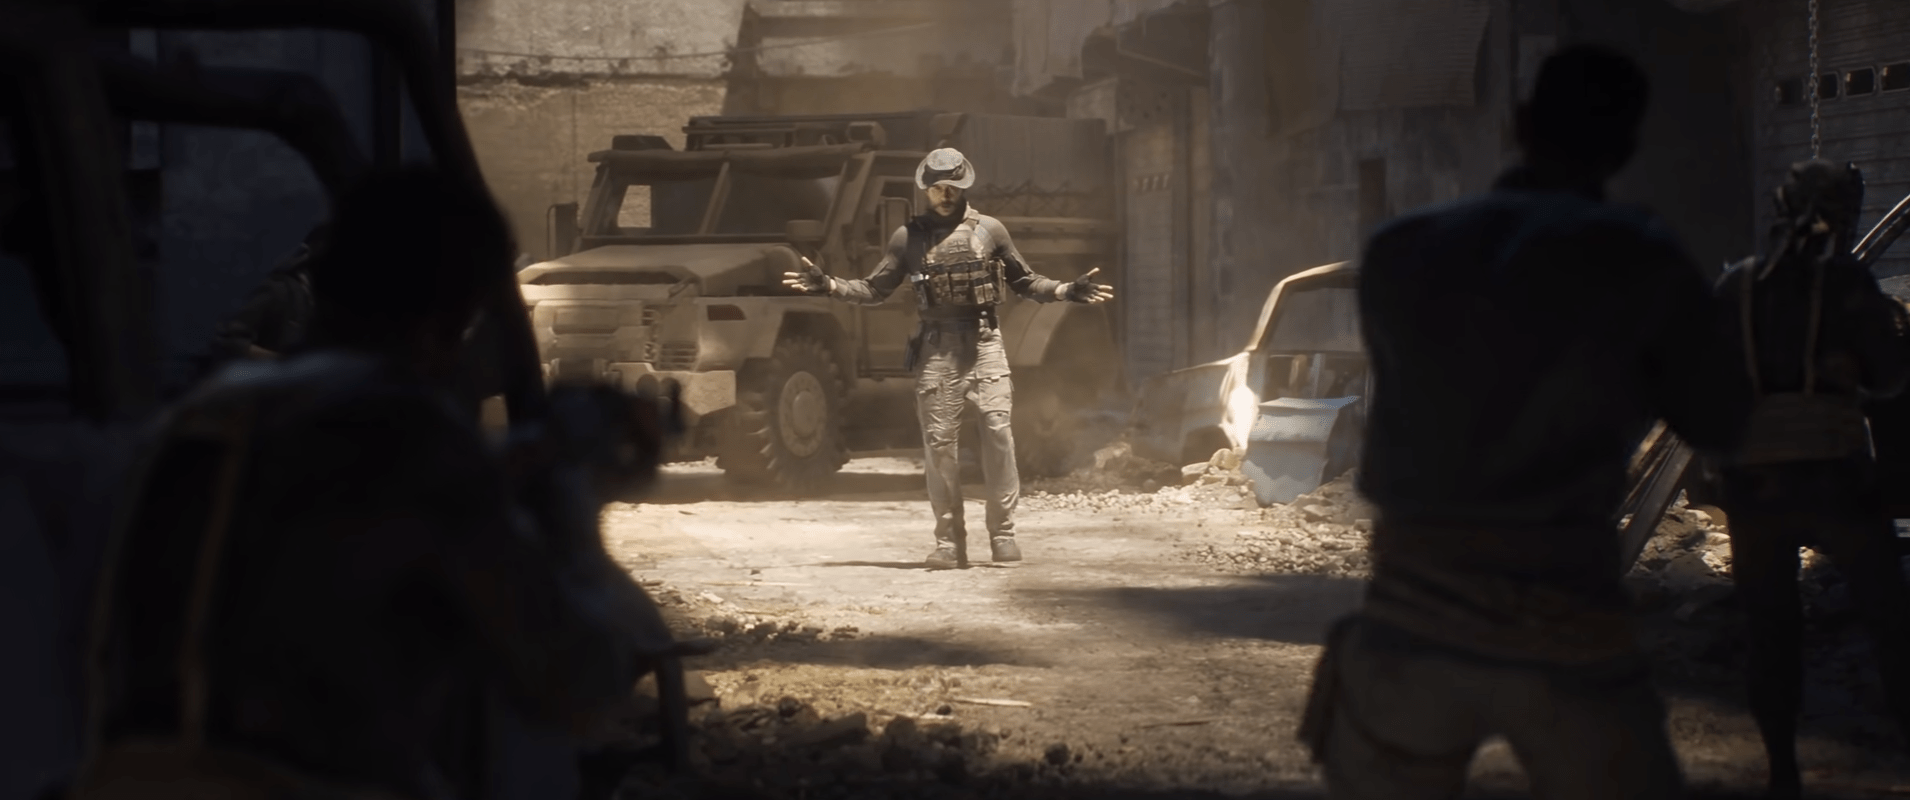 Call Of Duty: Modern Warfare Receives Huge Title Update, Includes The Addition Of The Crossbow